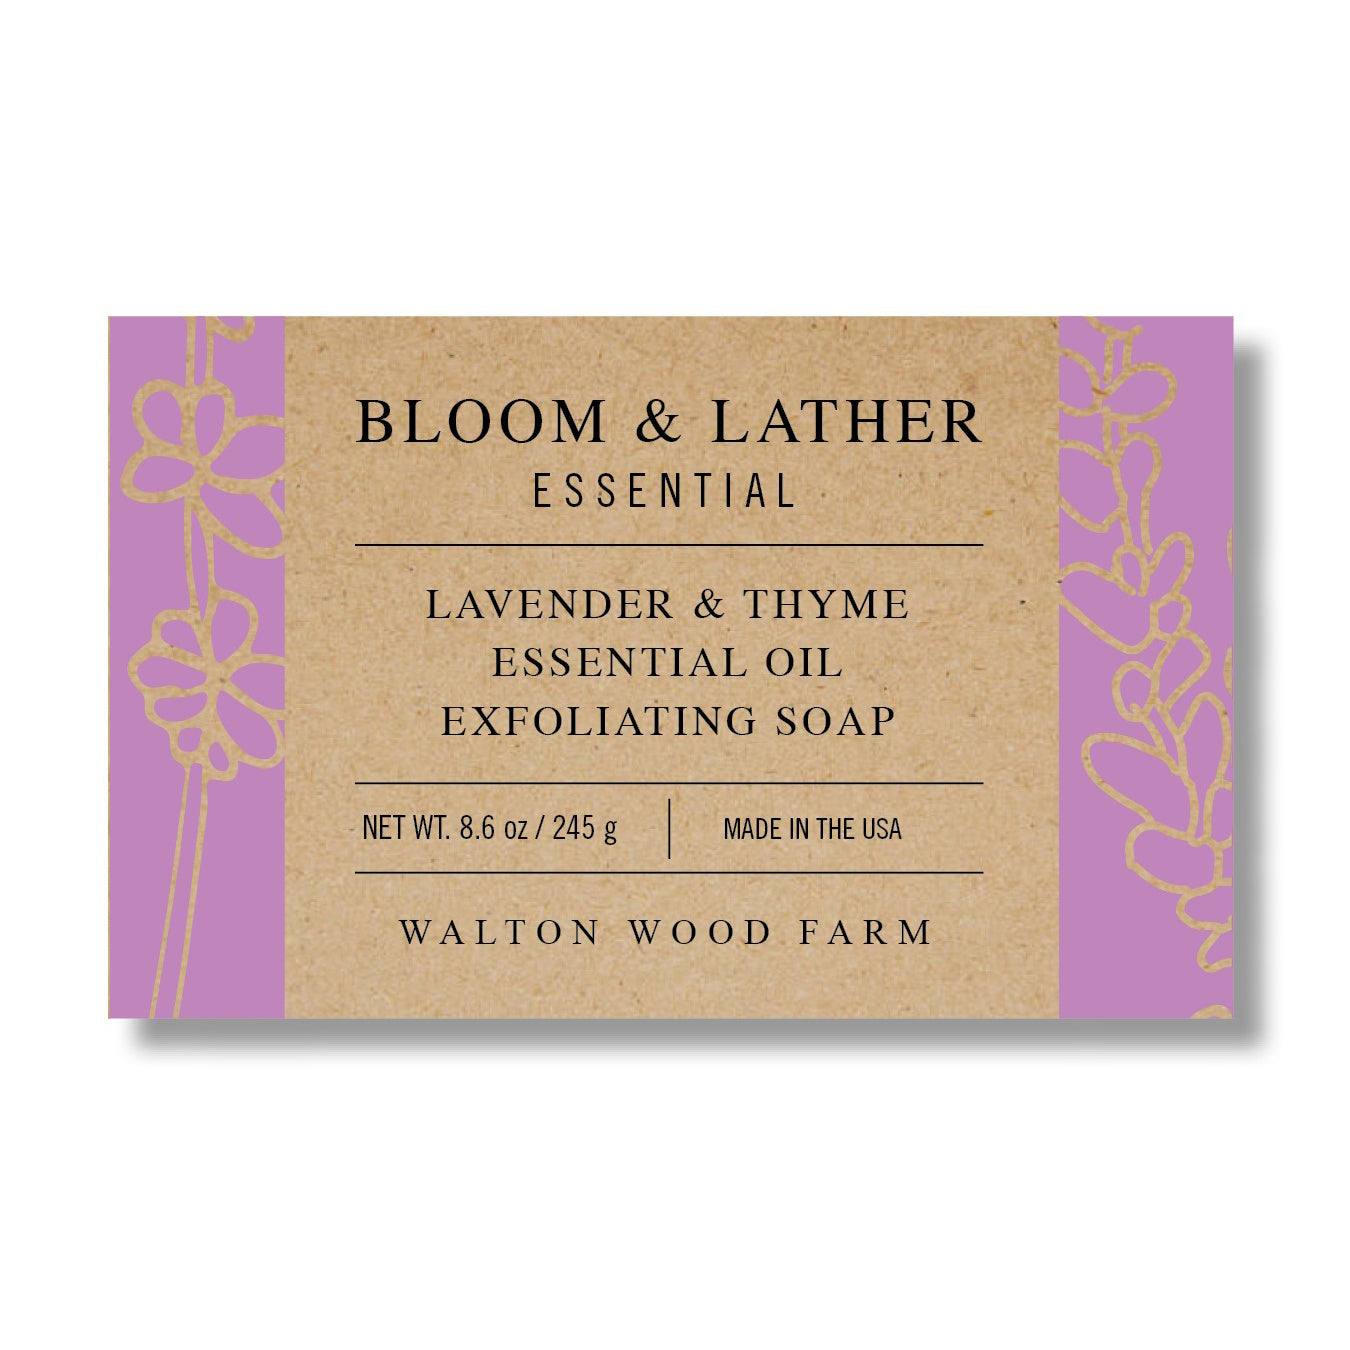 LAVENDER & THYME ESSENTIAL OIL SOAP